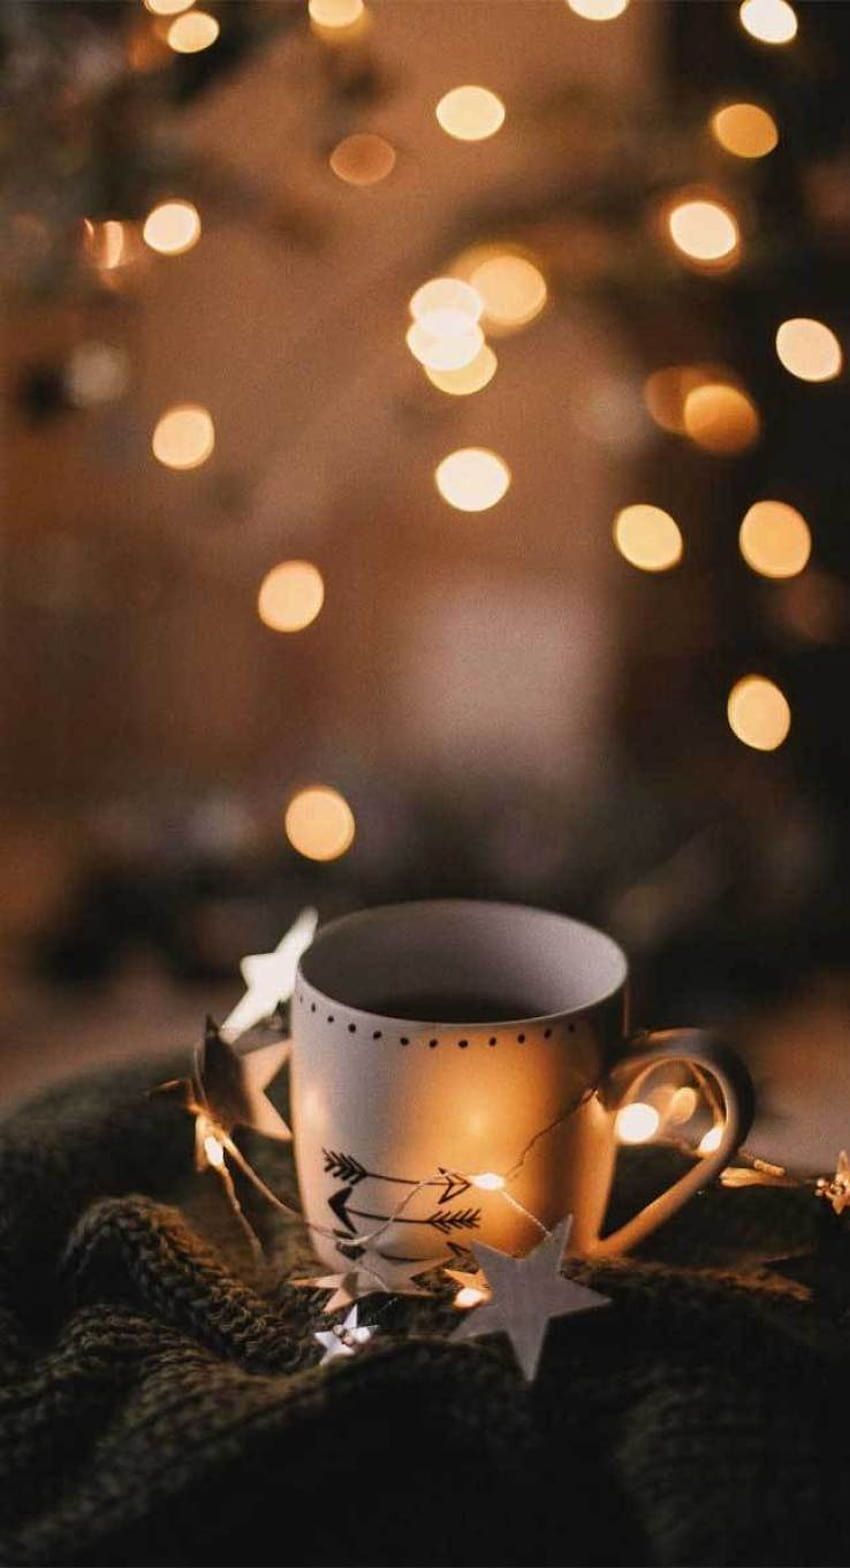 A cup of coffee with lights in the background - Cozy